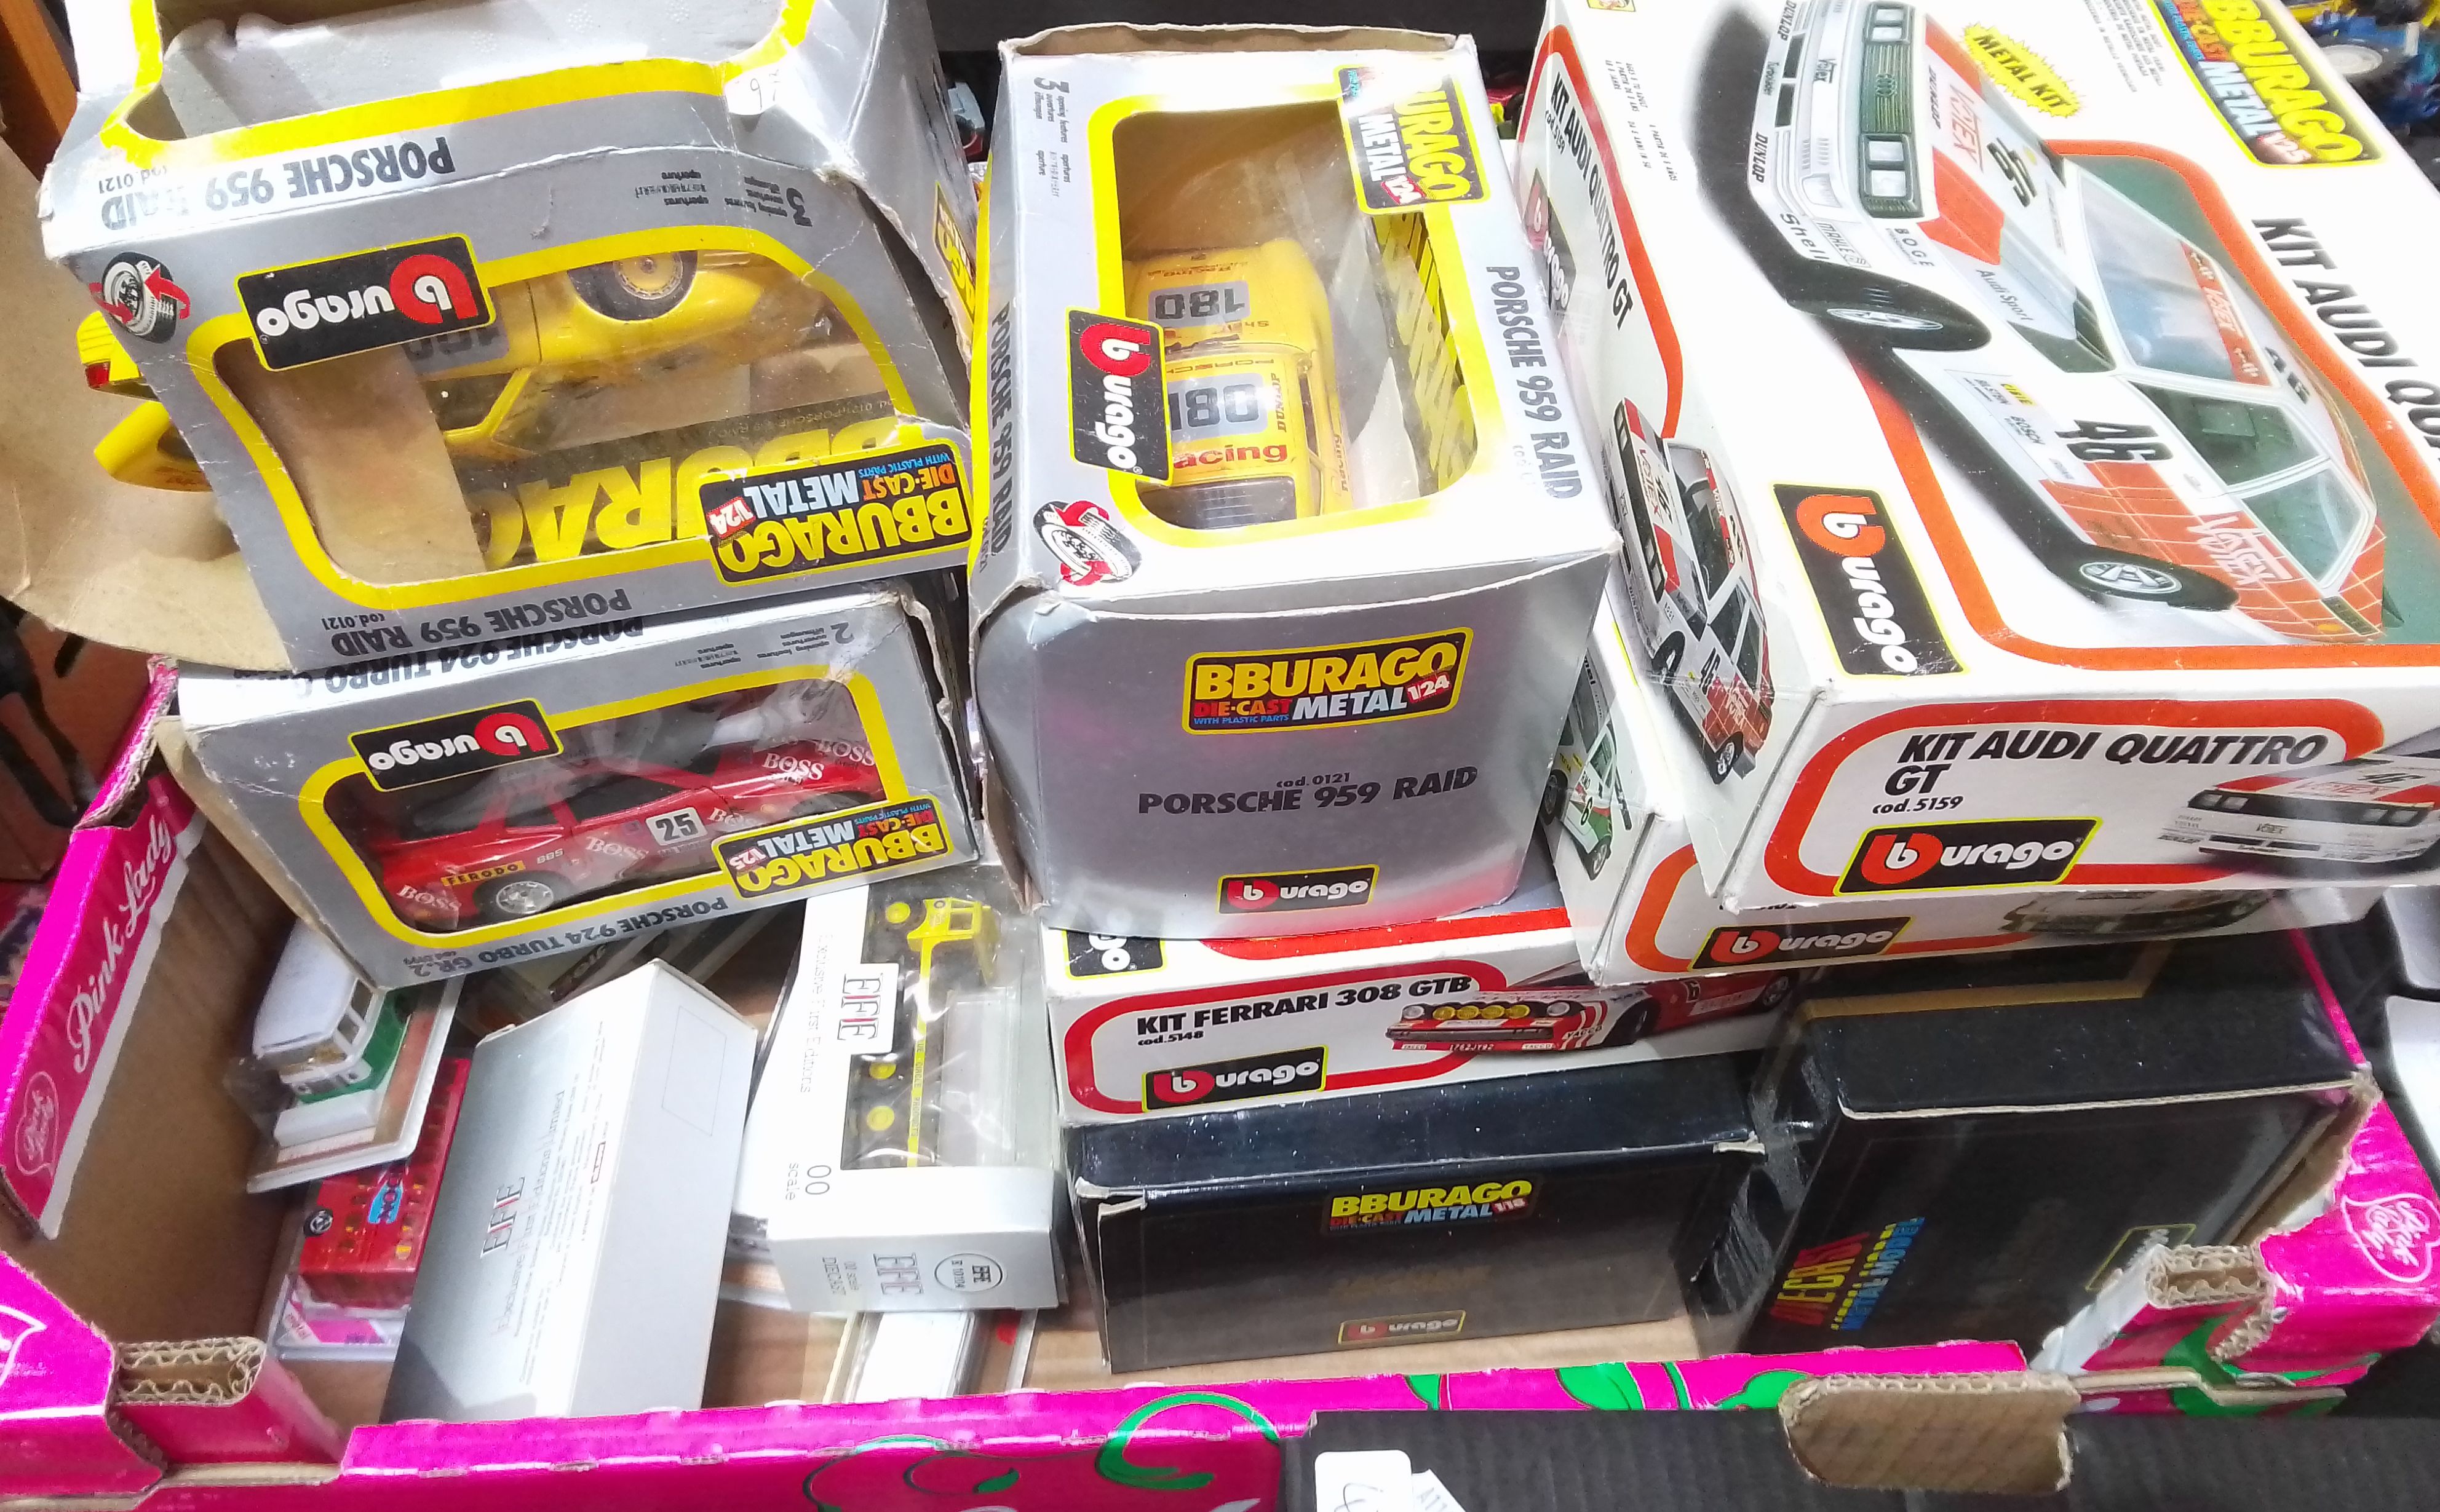 A box of mainly Burago model cars.